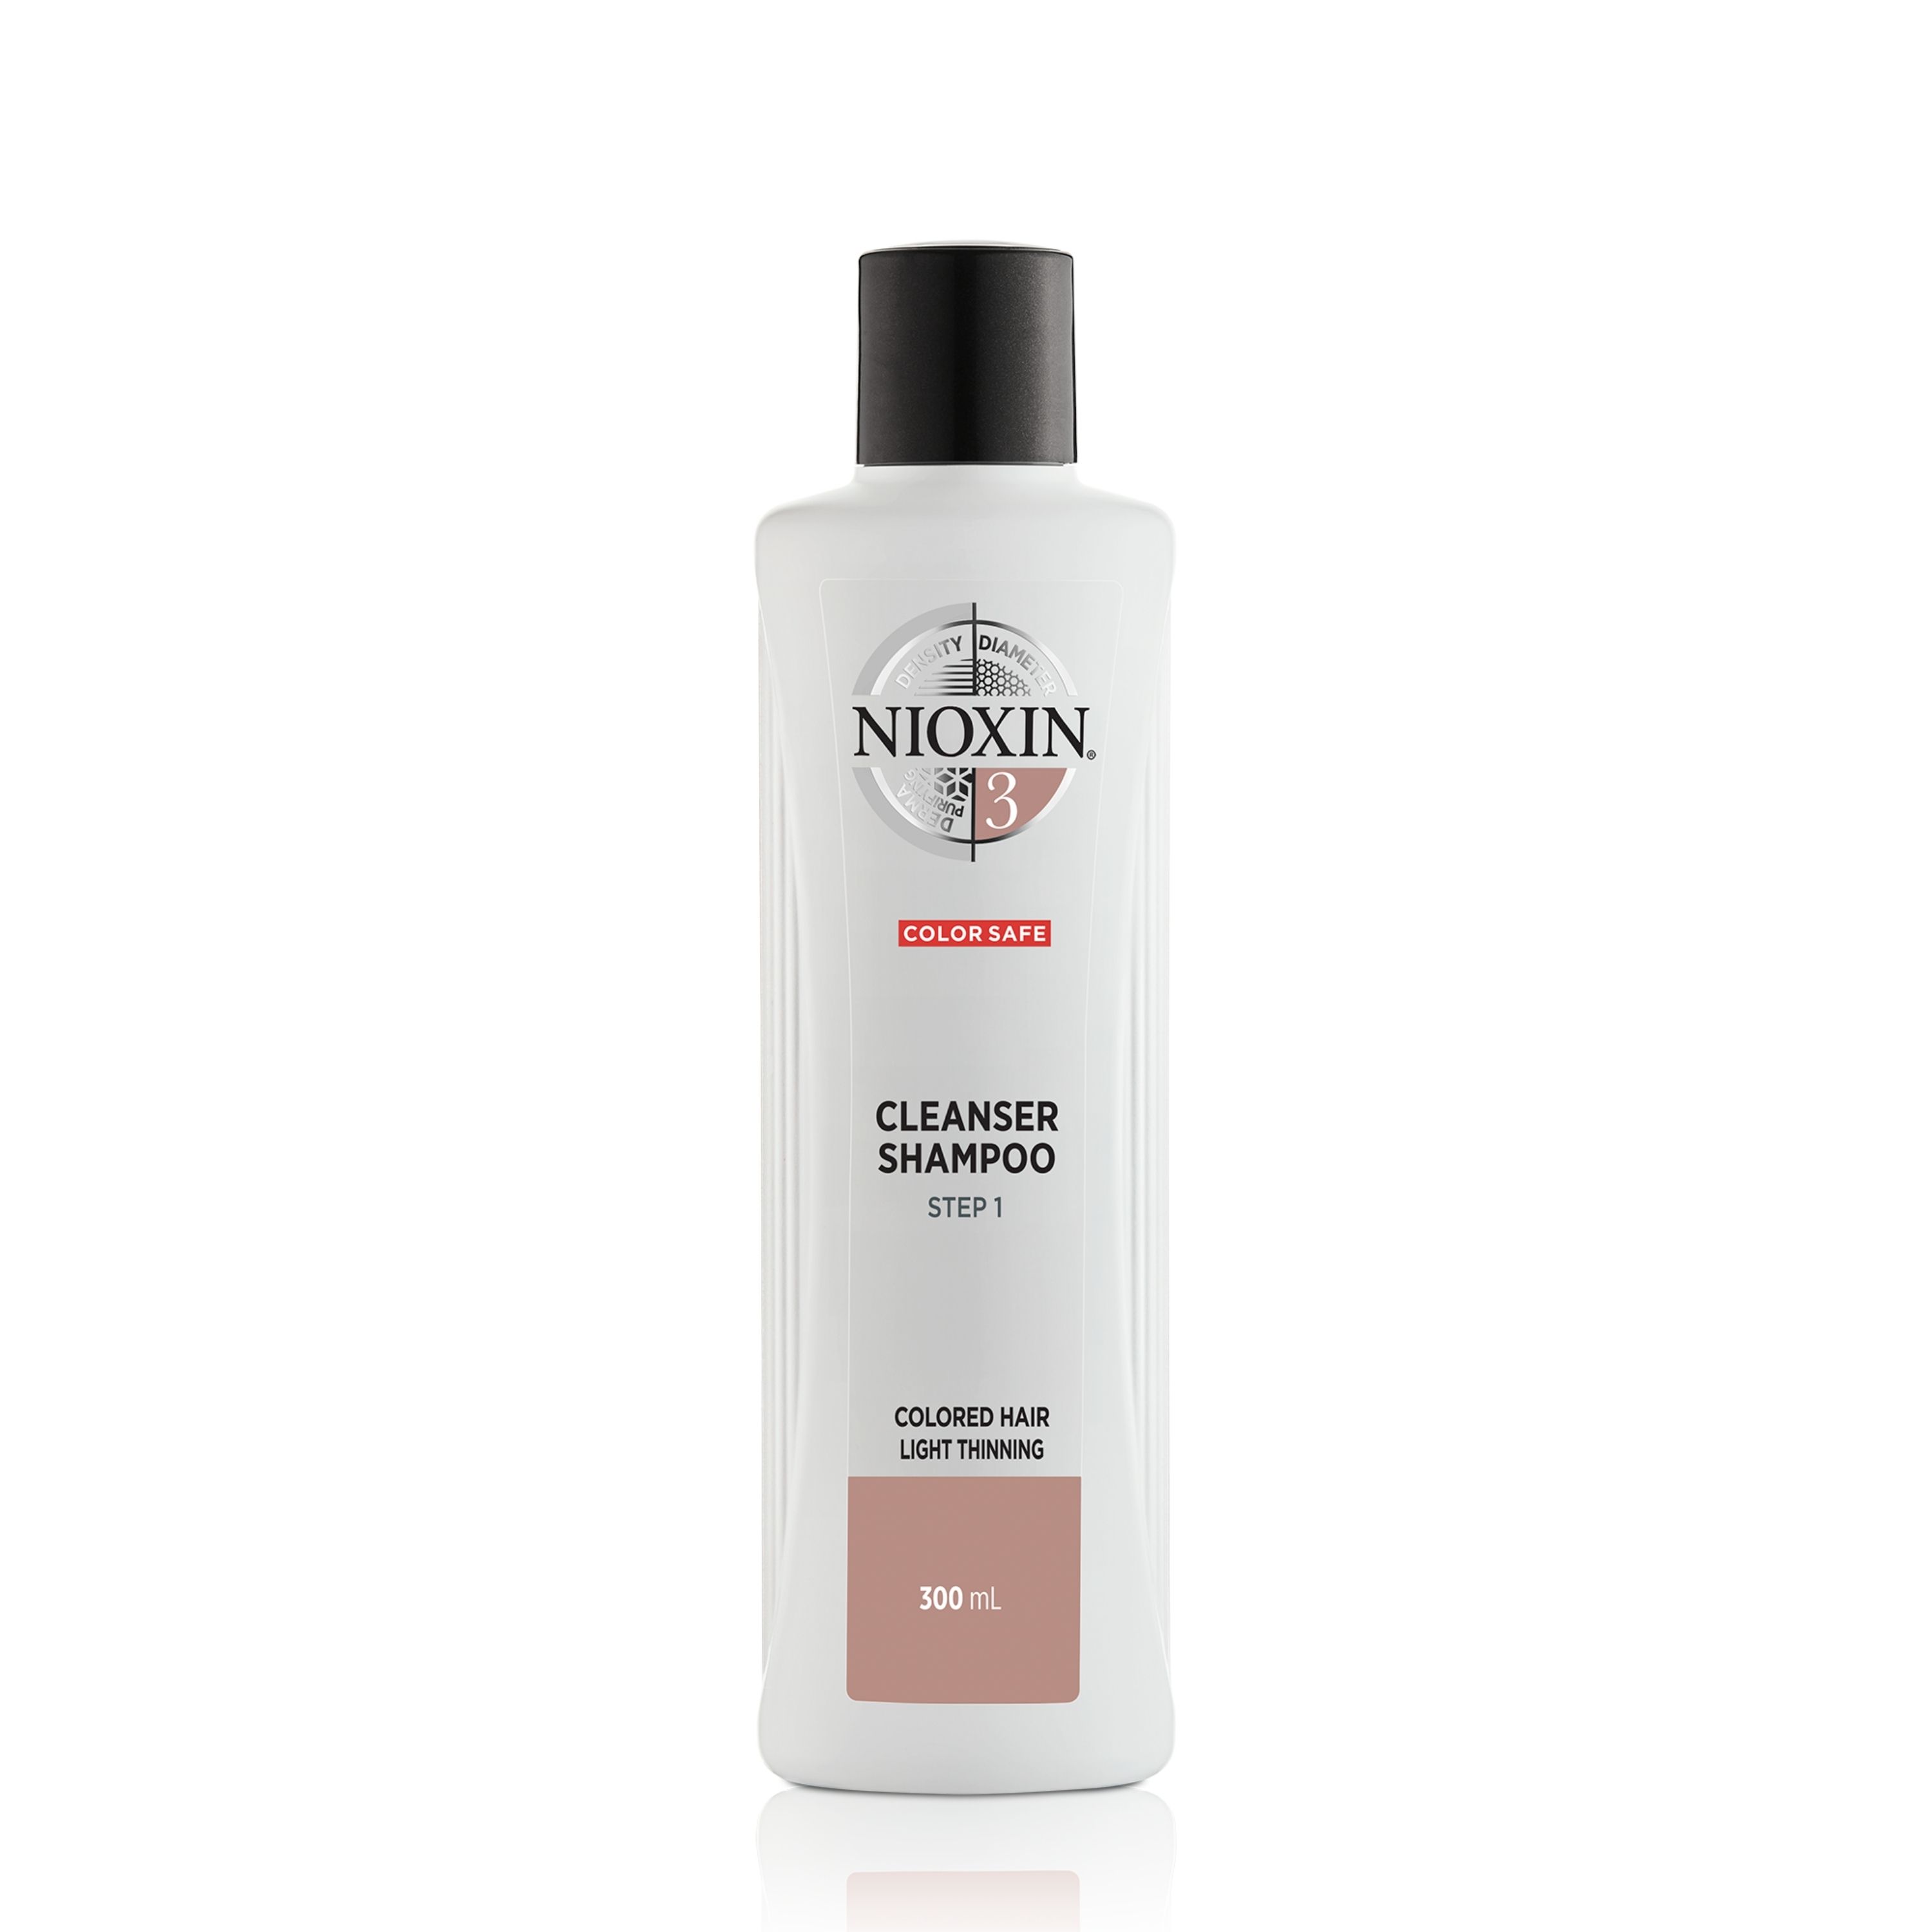 Image of Nioxin System 3 Cleanser Shampoo 300ml